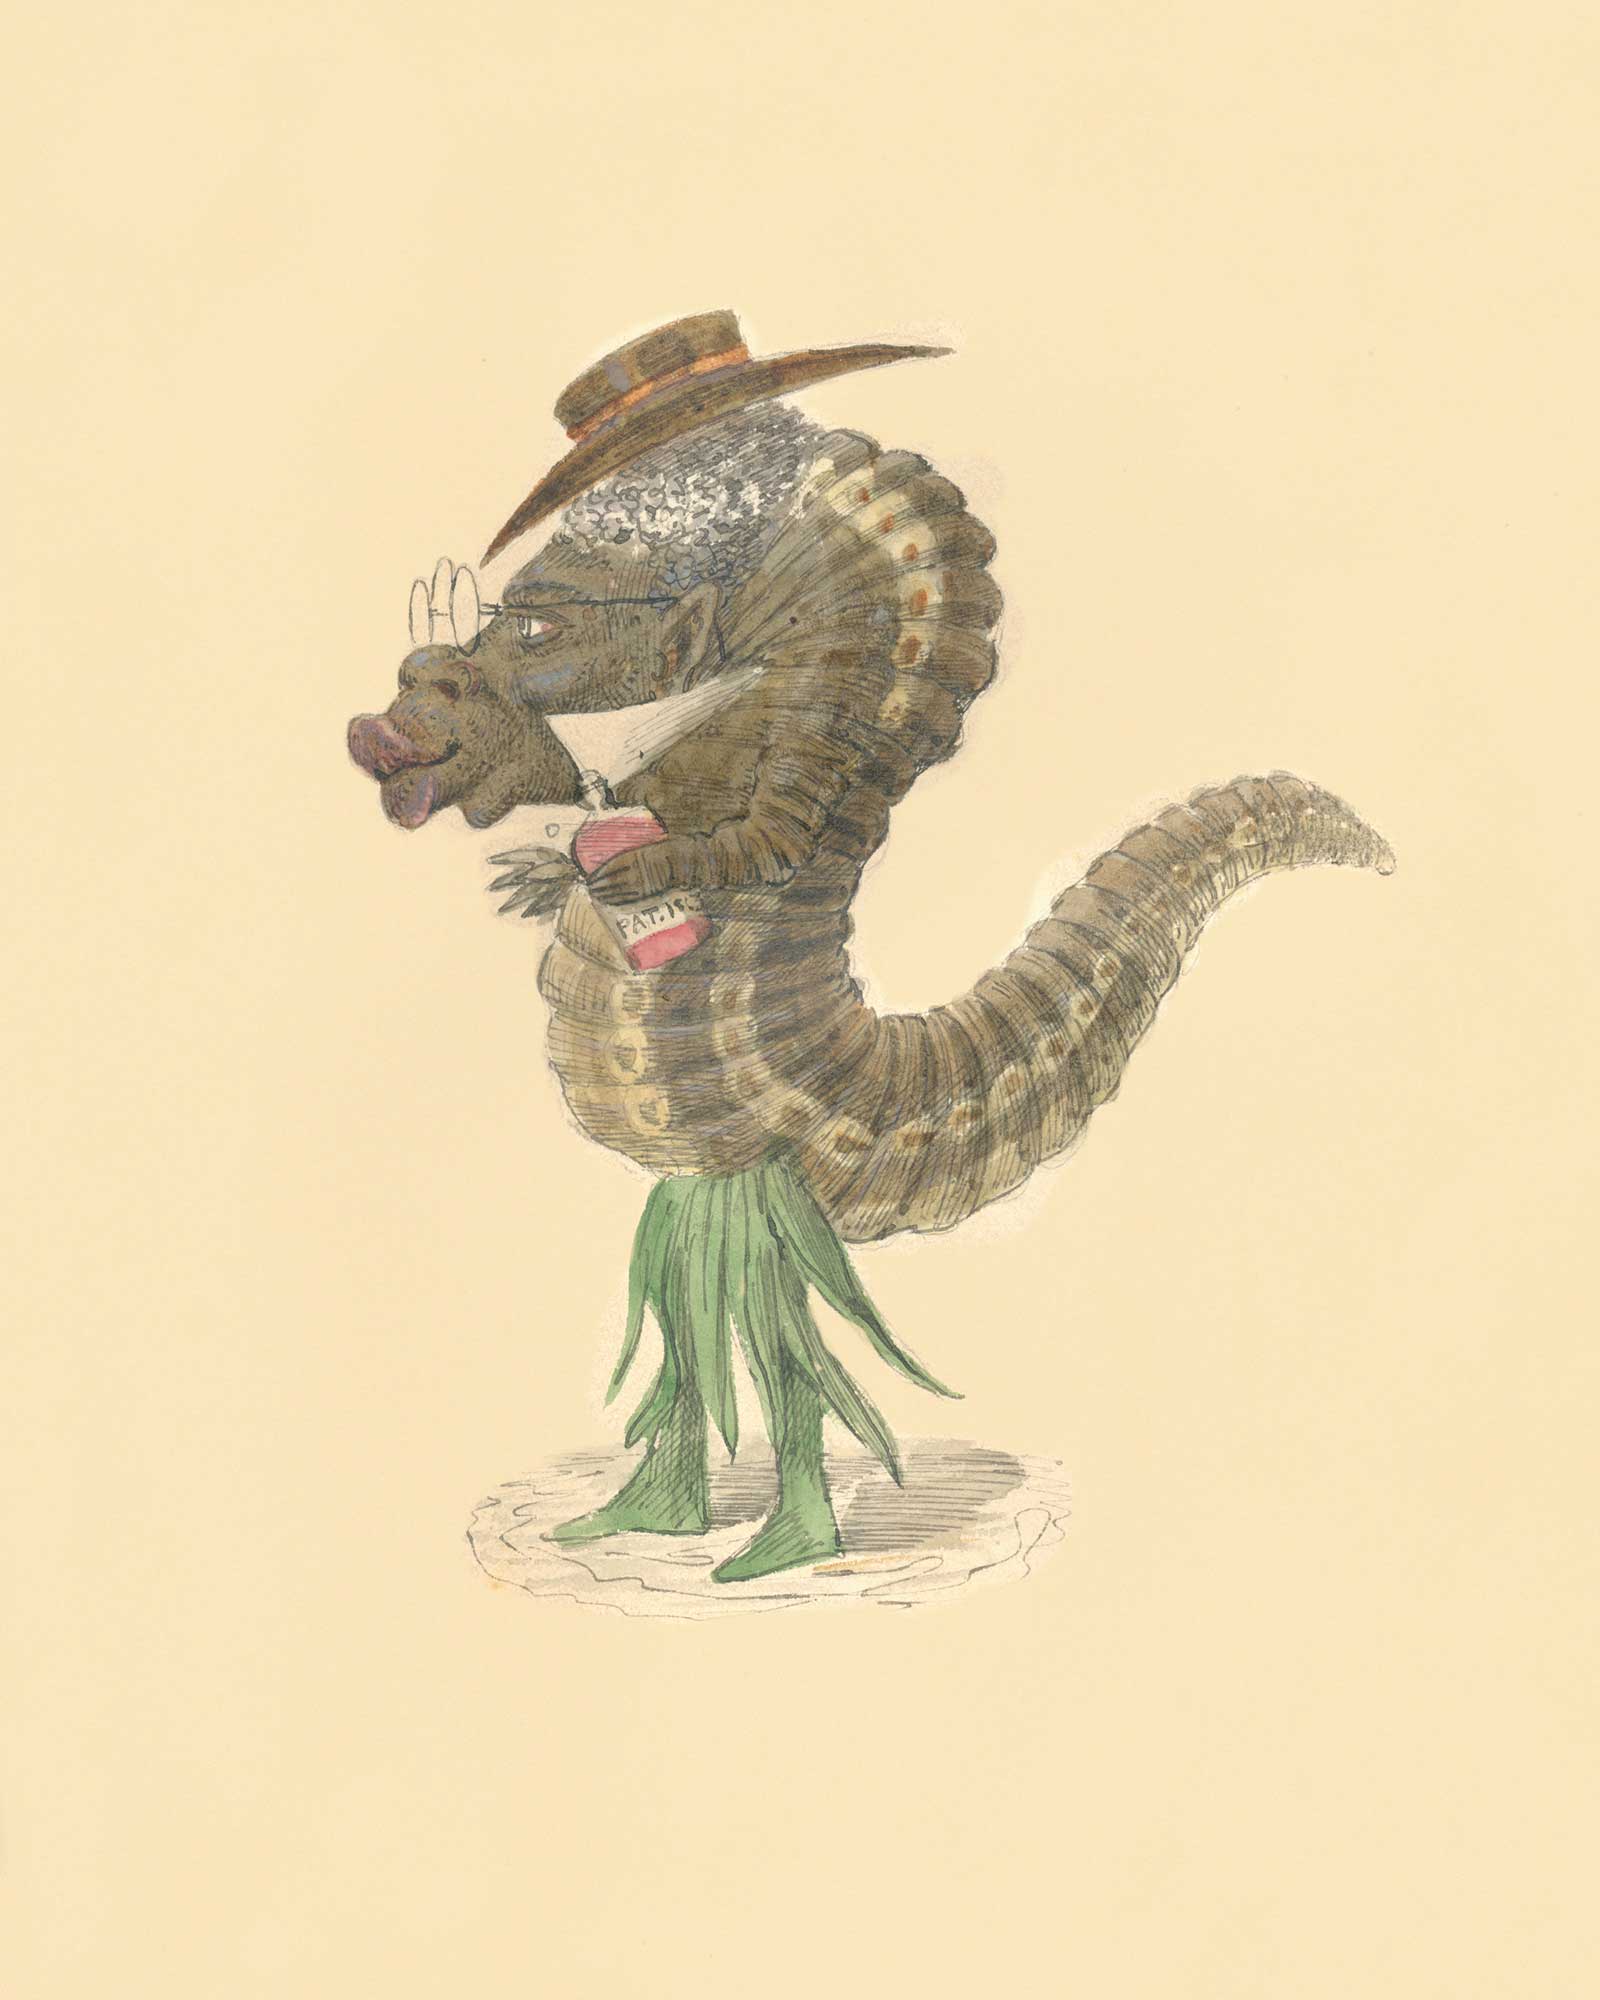 Charles Briton’s illustrated design of a caterpillar costume, created for the Mistick Krewe of Comus for the eighteen seventy-three Mardi Gras parade in New Orleans. Organized in eighteen fifty-six, Comus was the first of the krewes, or secret societies, that marched in the annual parades held in the city during the days leading up to the beginning of Lenten abstinence. Briton’s costumes were created to illustrate the theme of the organization’s procession that year: “The Missing Links to Darwin’s Origin of Species.” Featuring fantastical representations of a wide range of fauna and flora, Briton’s designs for the conservative and predominantly Anglo-American Comus krewe were intended to mock both the new theories of evolution and the Reconstruction-era politicians of the day.